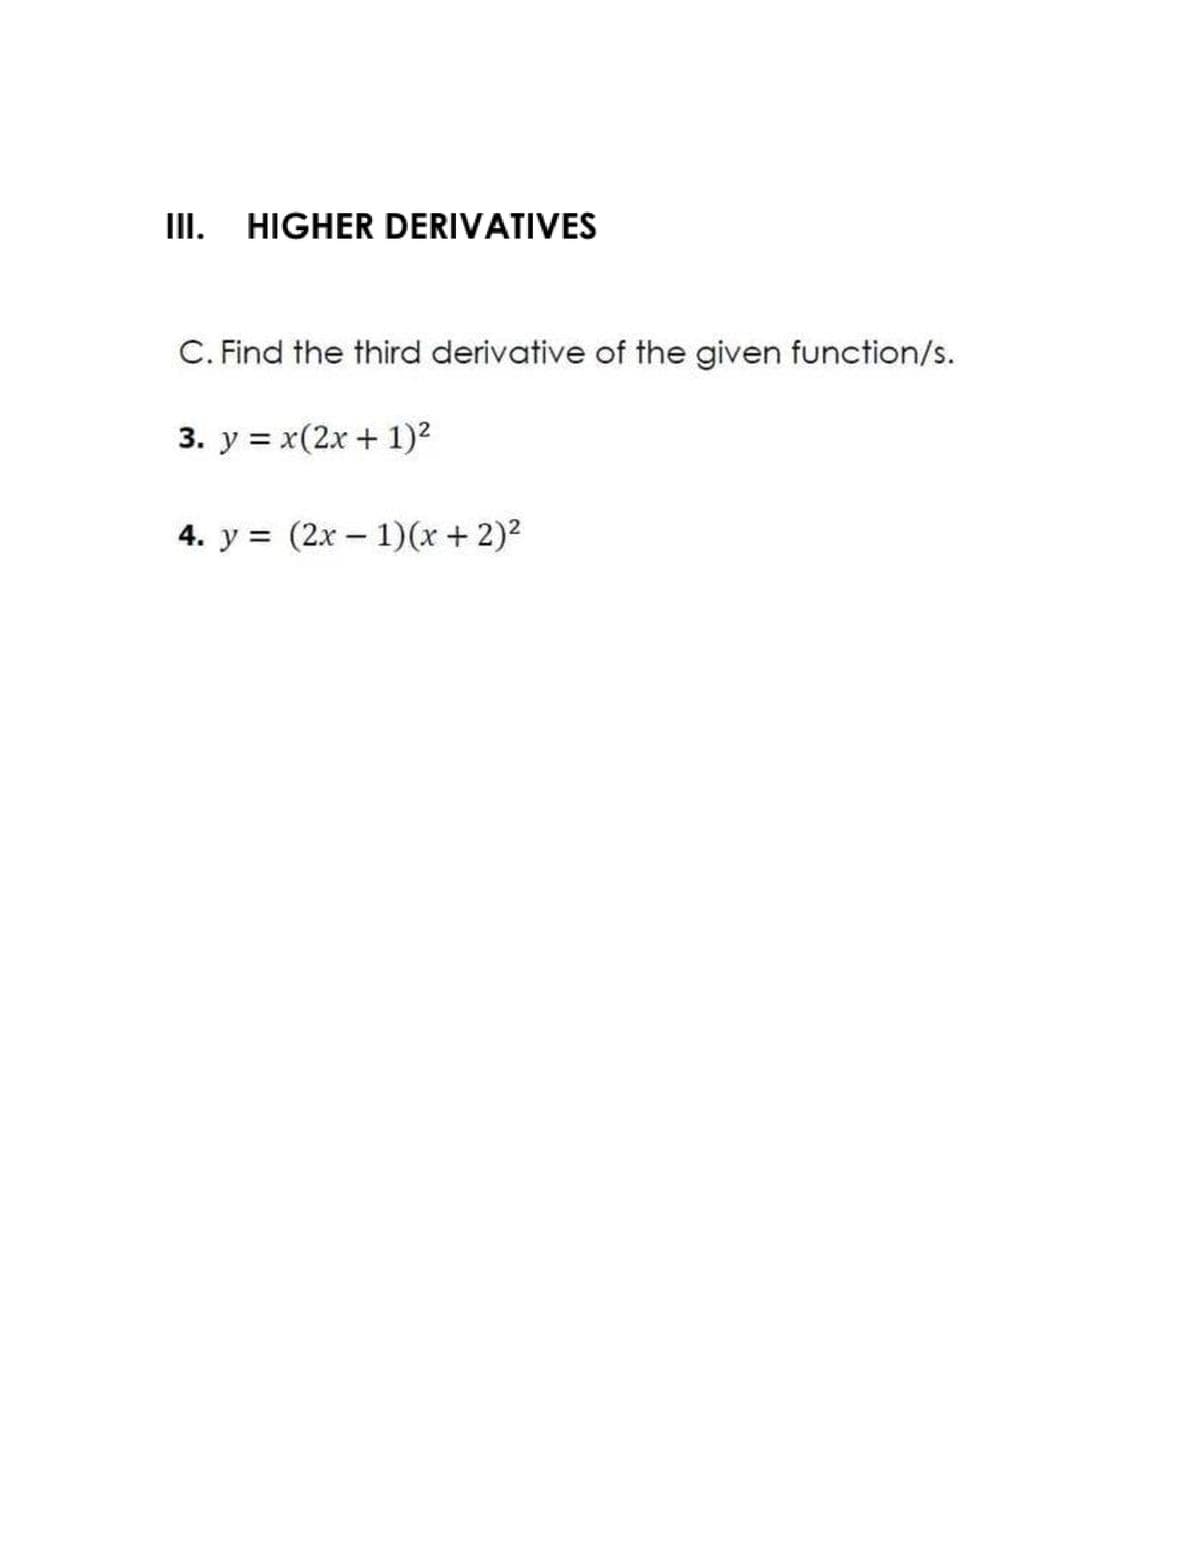 II.
HIGHER DERIVATIVES
C. Find the third derivative of the given function/s.
3. y = x(2x + 1)?
4. y = (2x – 1)(x + 2)2
